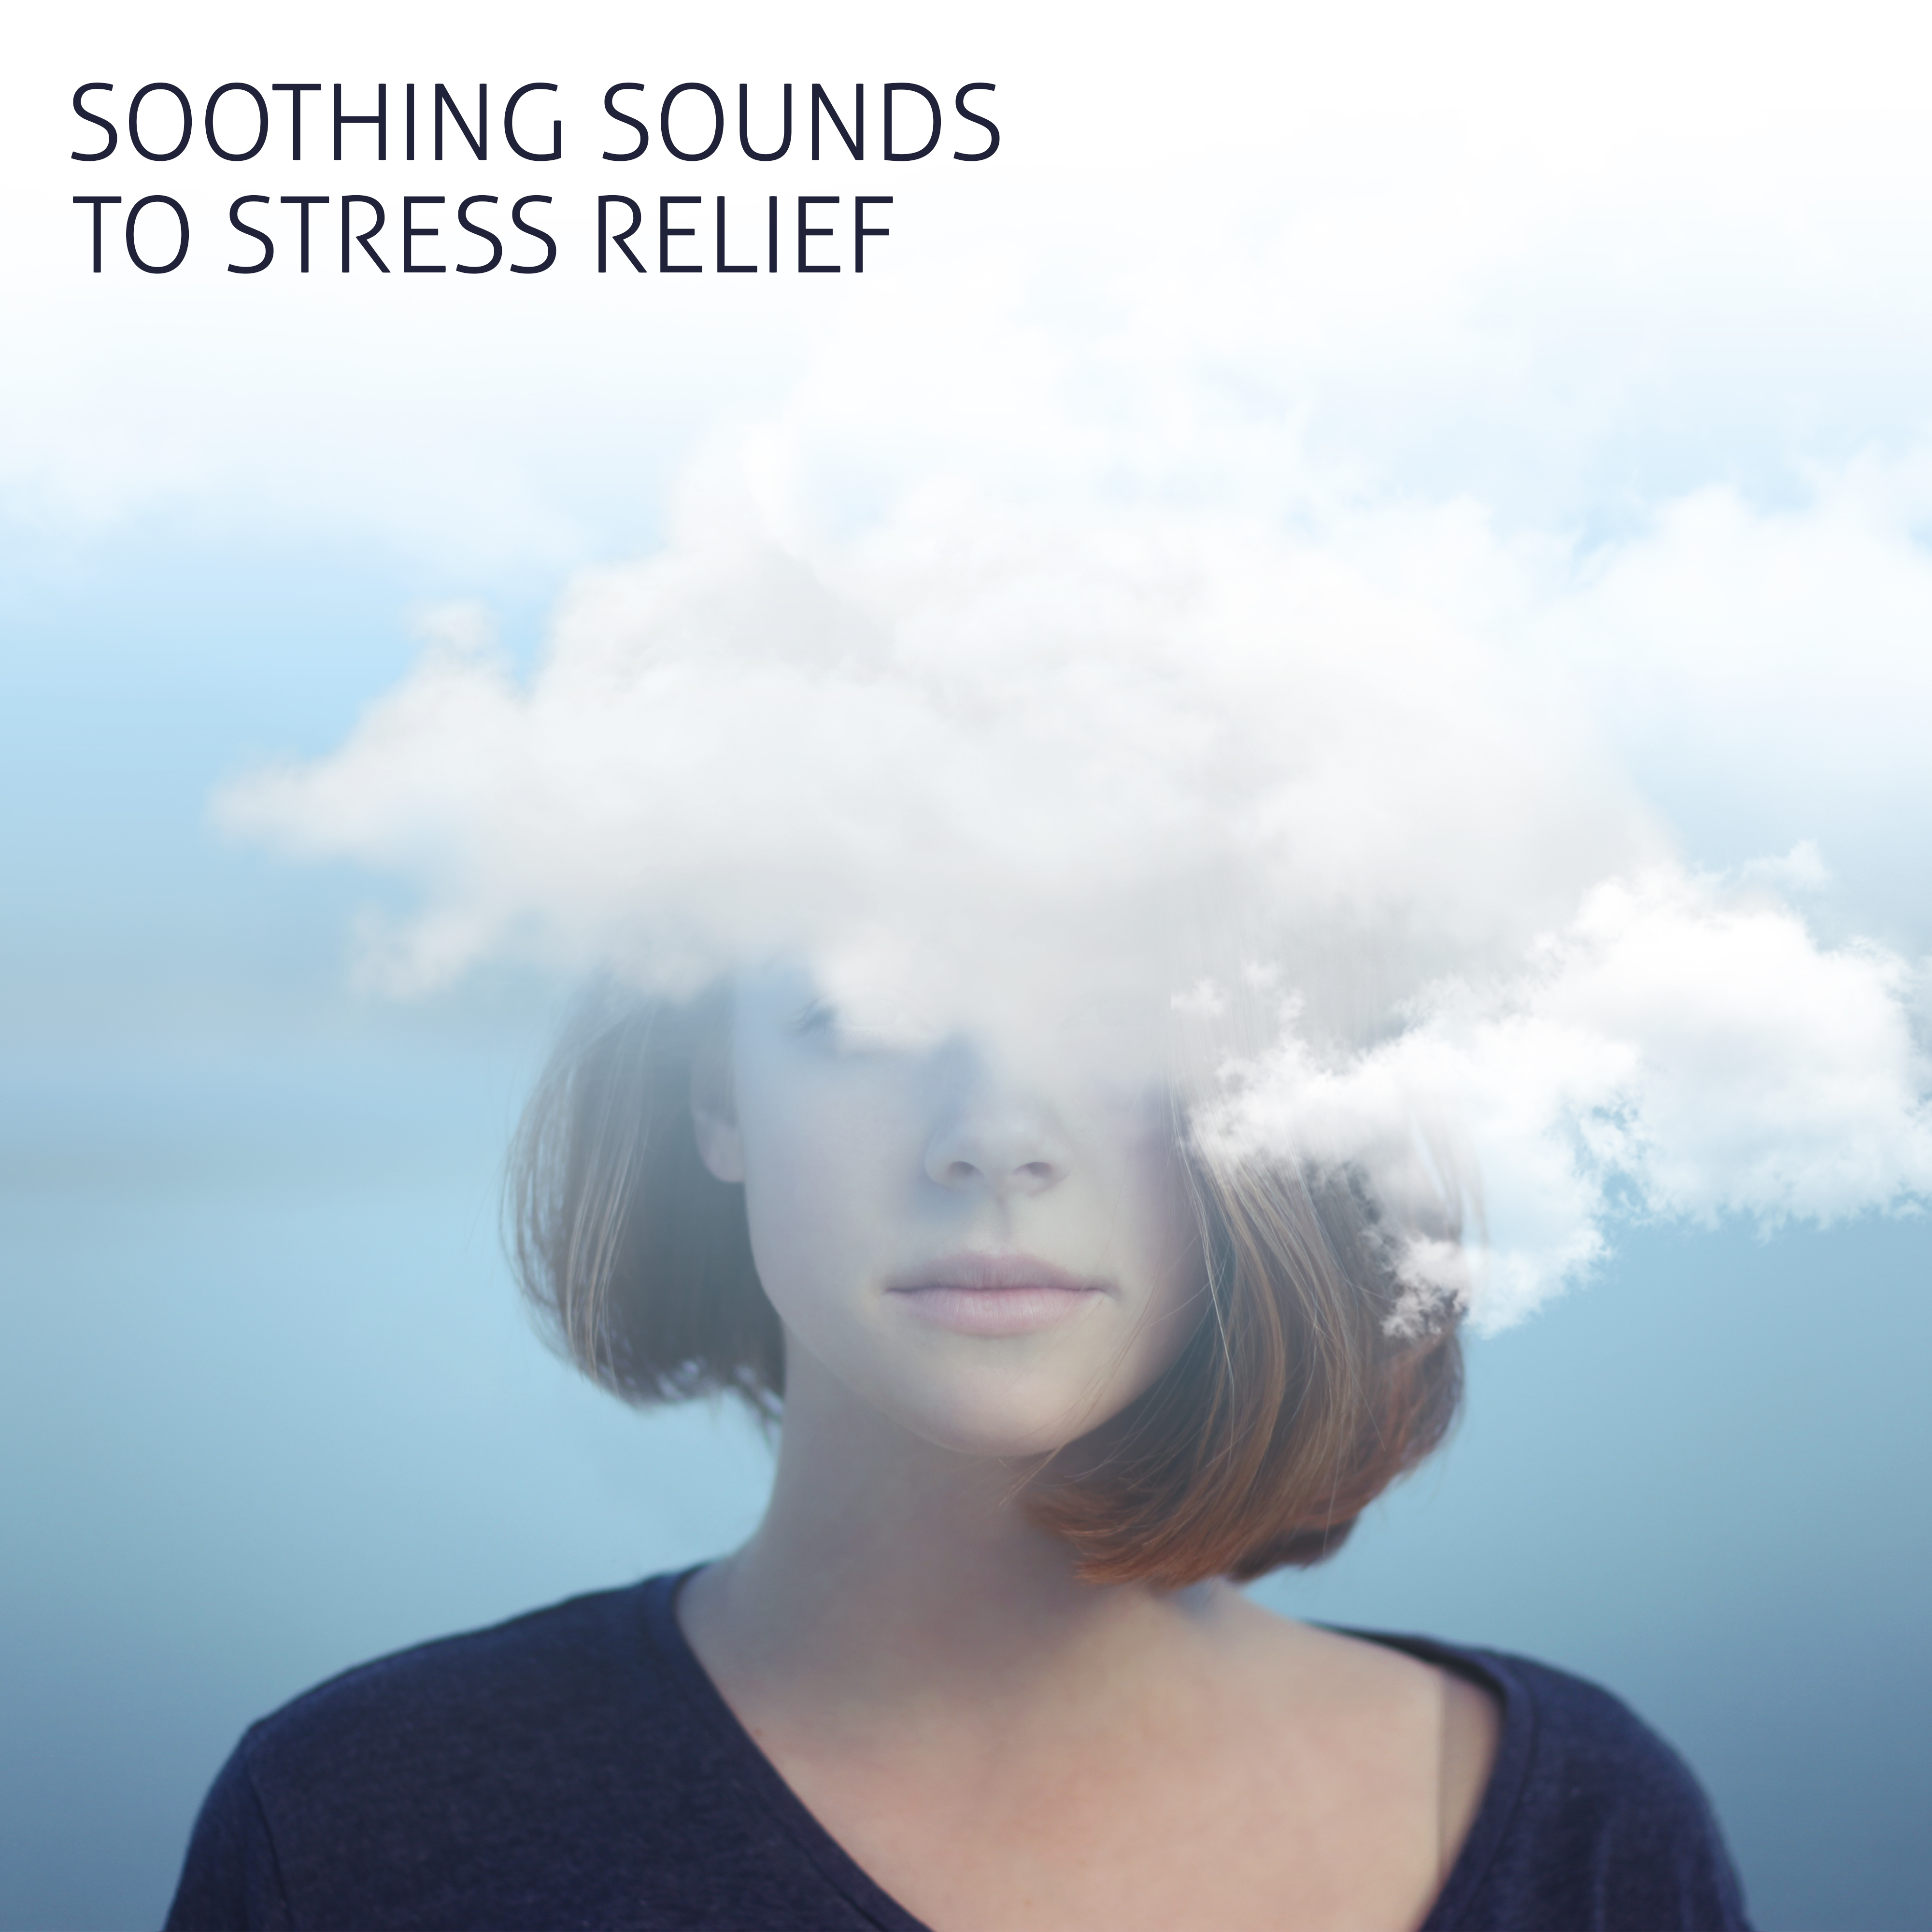 Soothing Sounds to Stress Relief – Calming New Age Sounds, Rest & Relax, Easy Listening, Relaxation Music